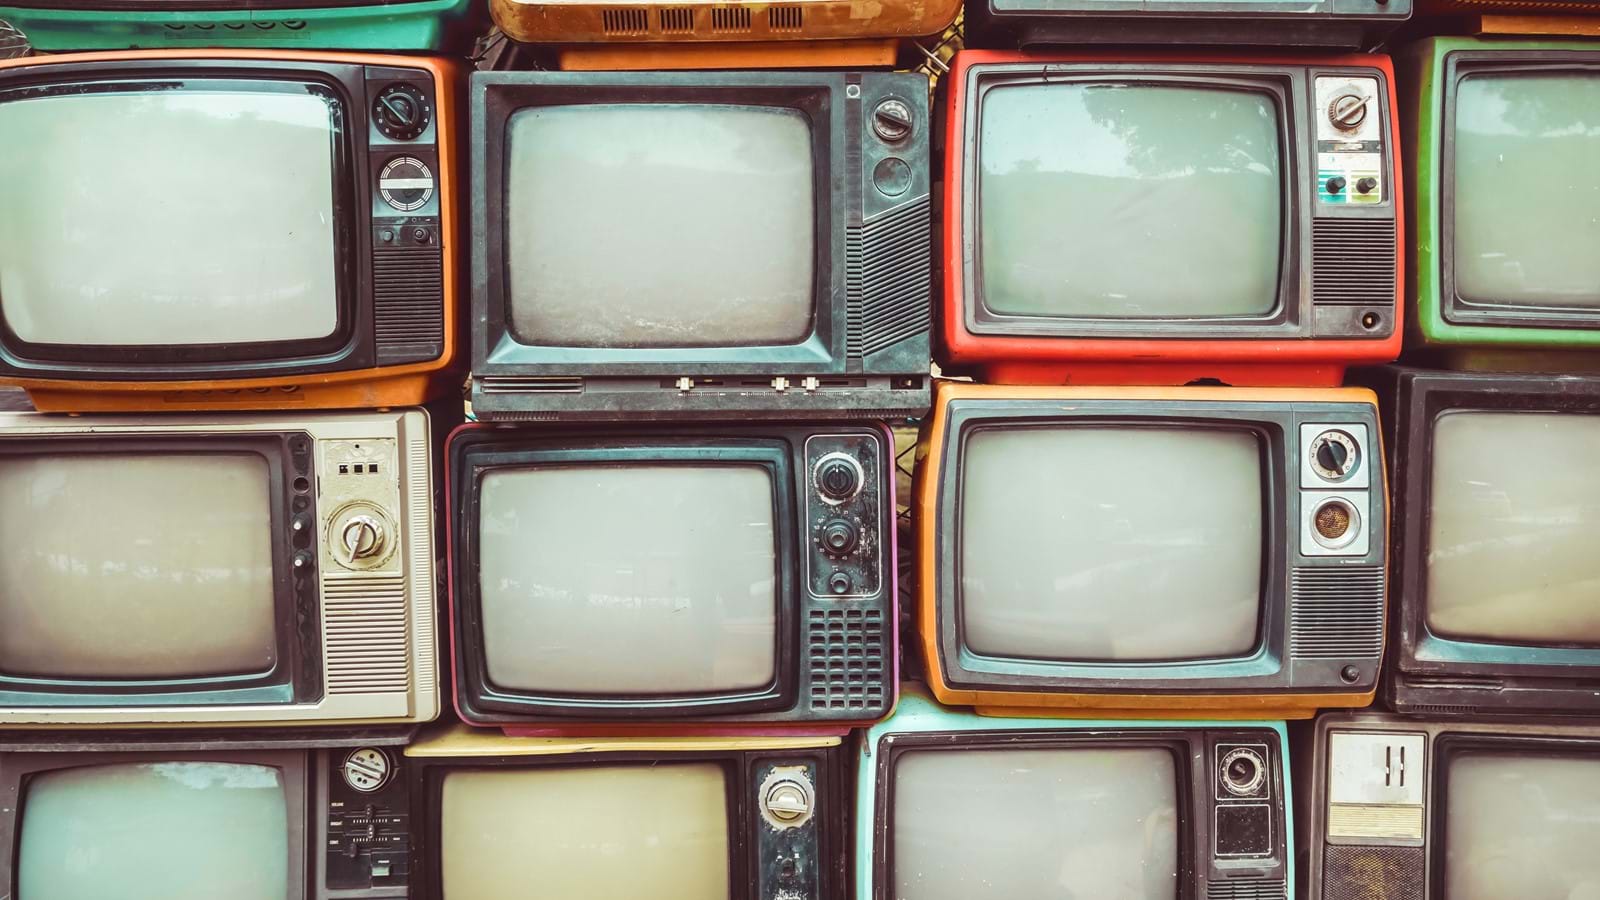 Old retro televisions no longer fit for purpose